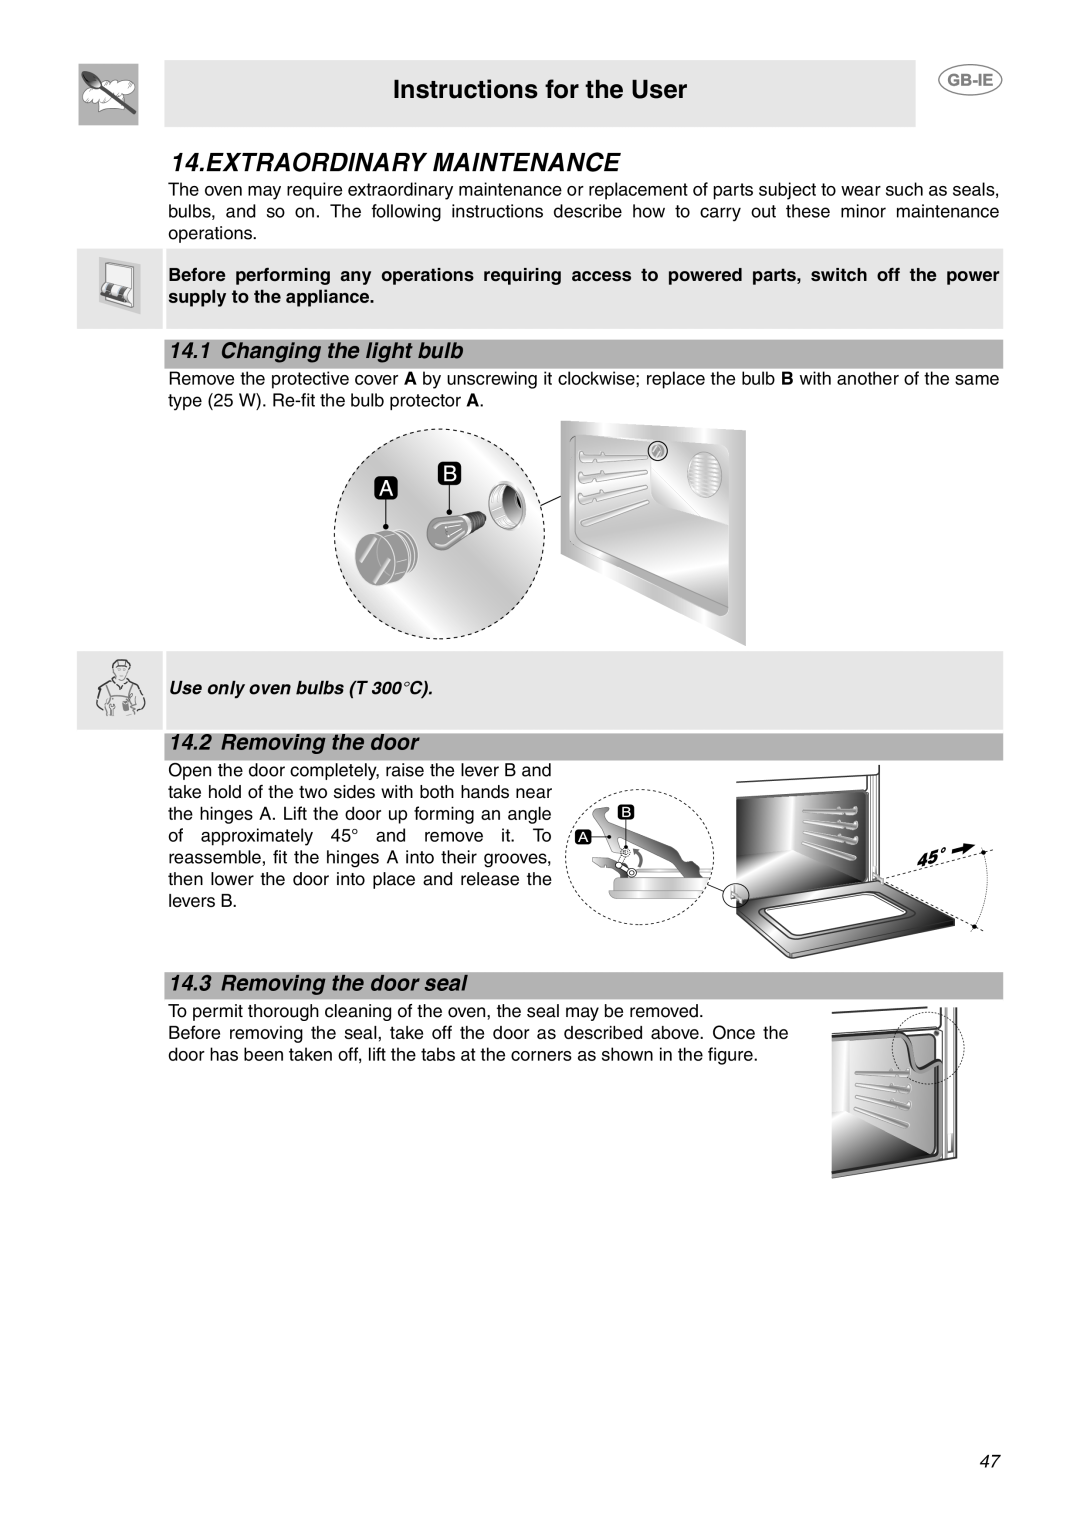 Smeg CE9CMX Extraordinary Maintenance, Changing the light bulb, Removing the door seal, Instructions for the User 